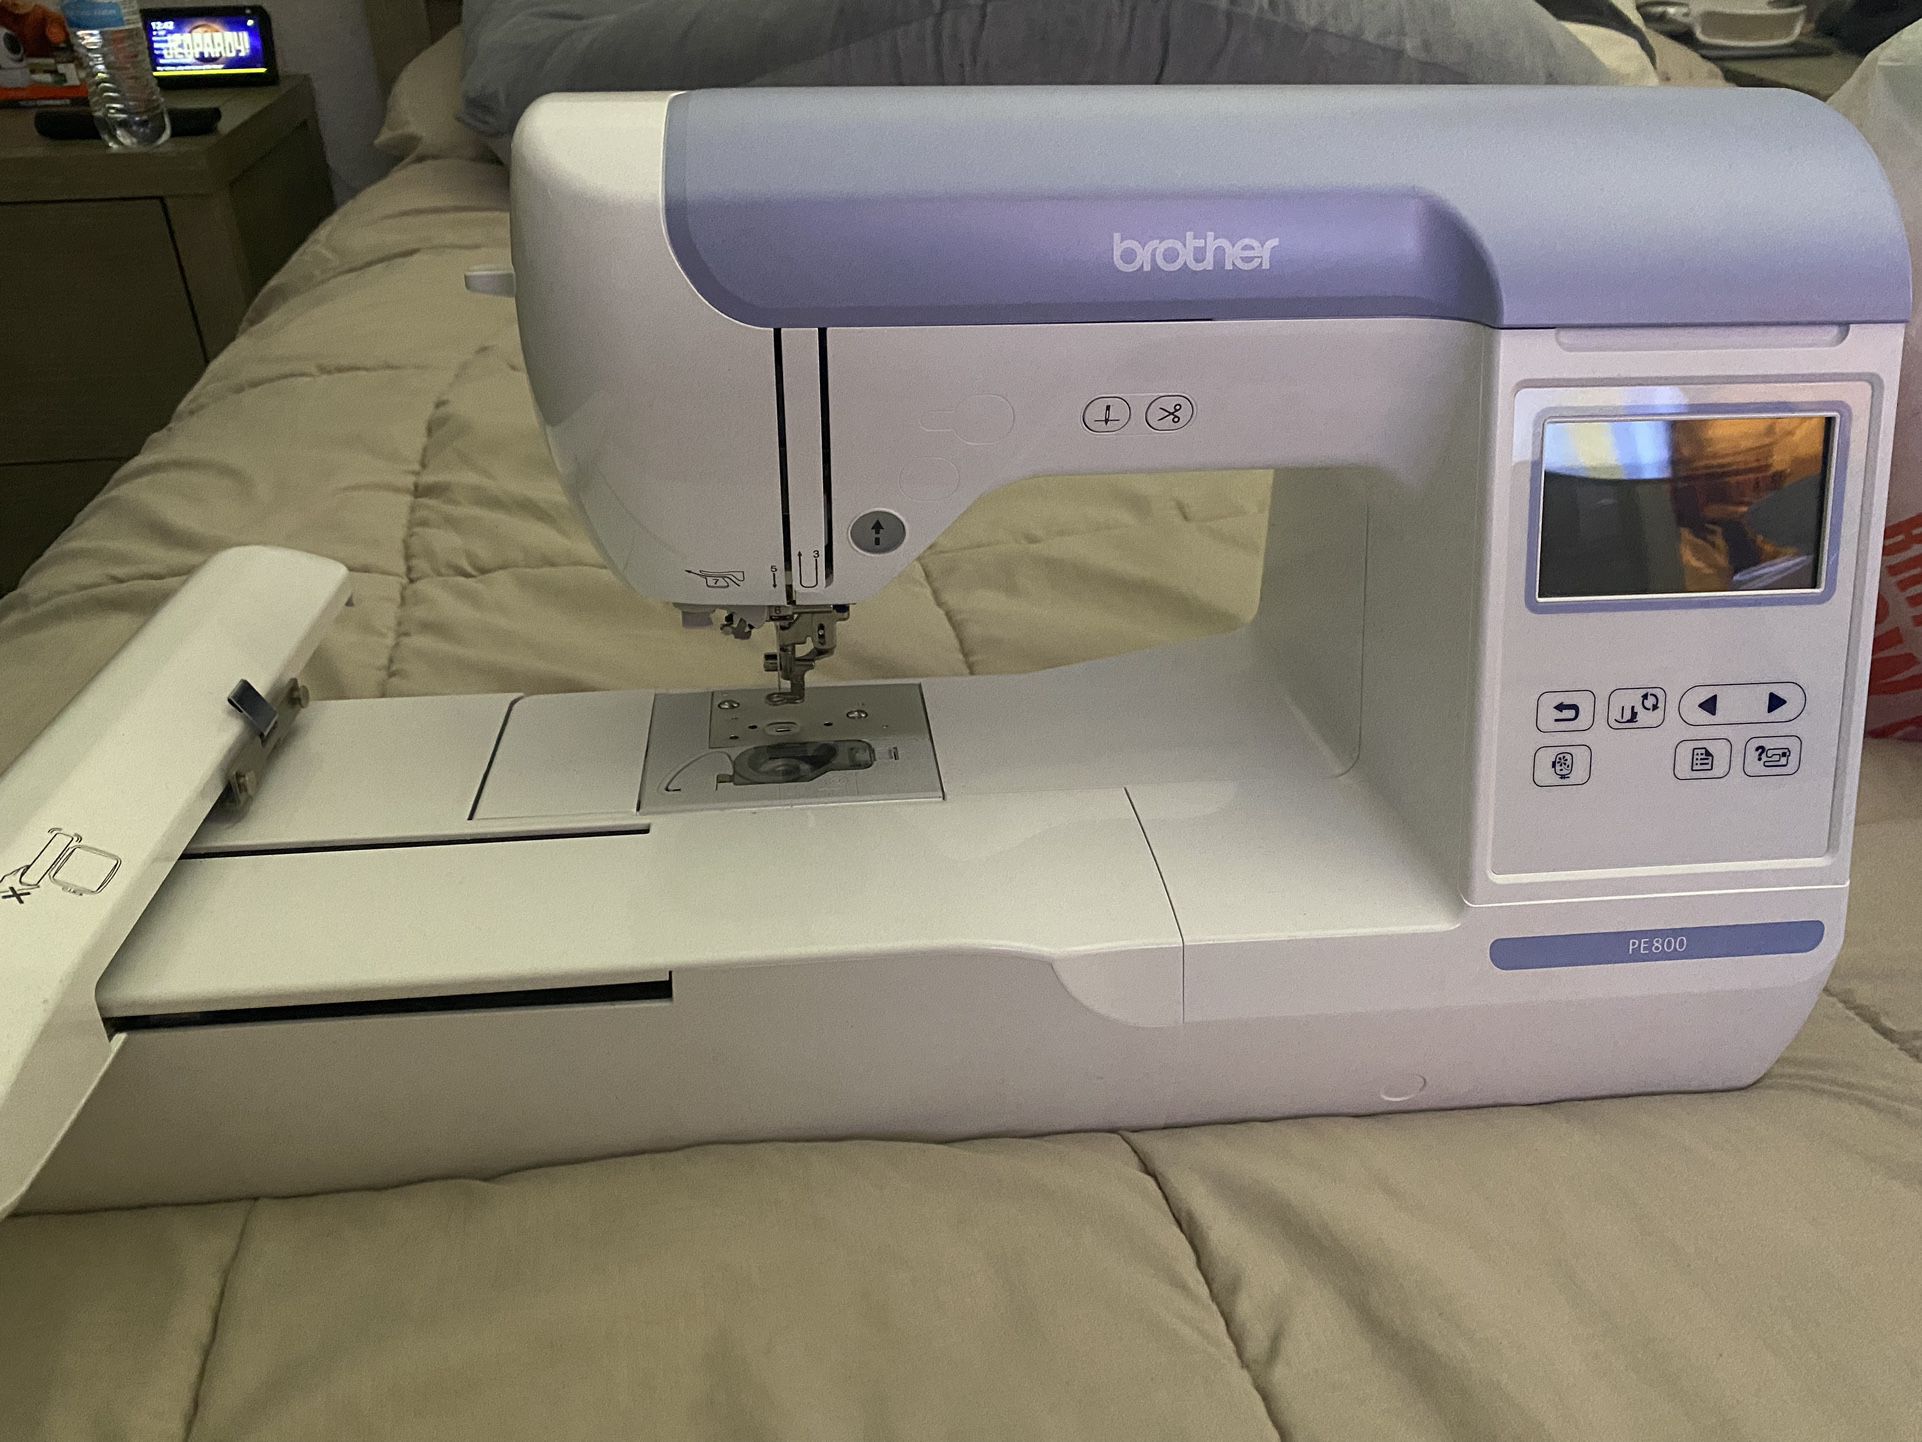 Brother Embroidery Machine PE800 for Sale in San Antonio, TX - OfferUp